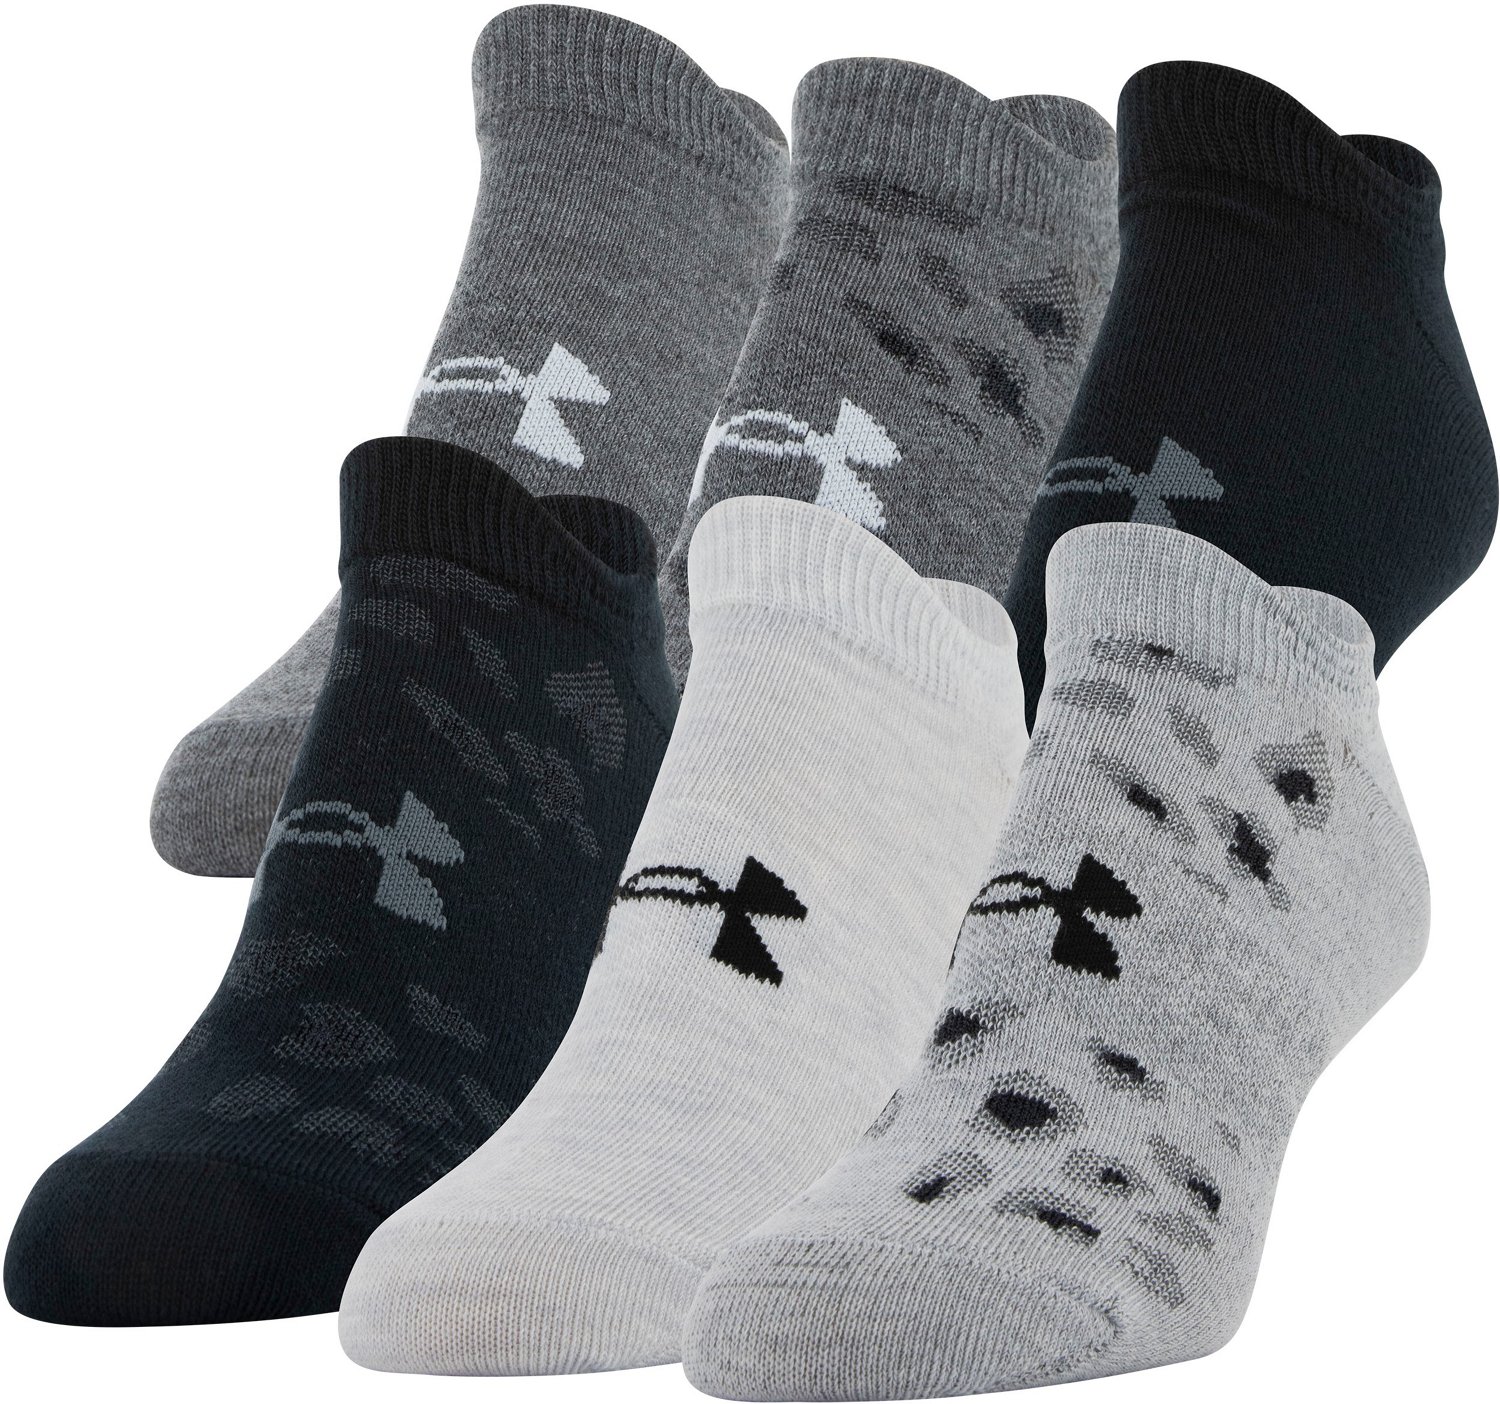 Under Armour Essential 2.0 Performance Training No-Show Socks 6 Pack ...